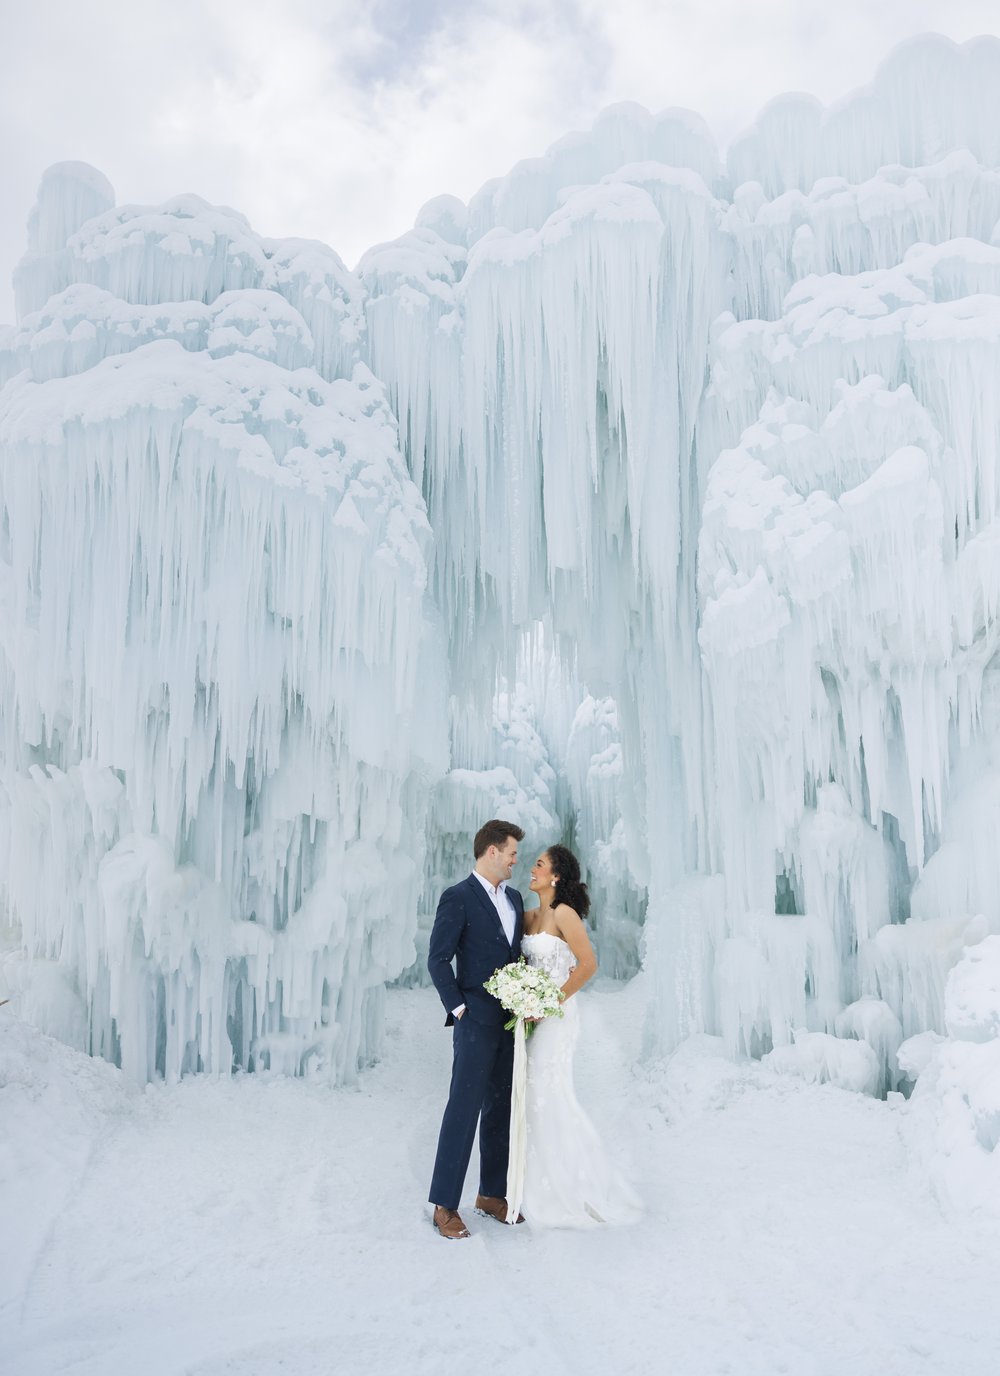 2301-03 Ice Castles Styled Bridals_01641.jpg